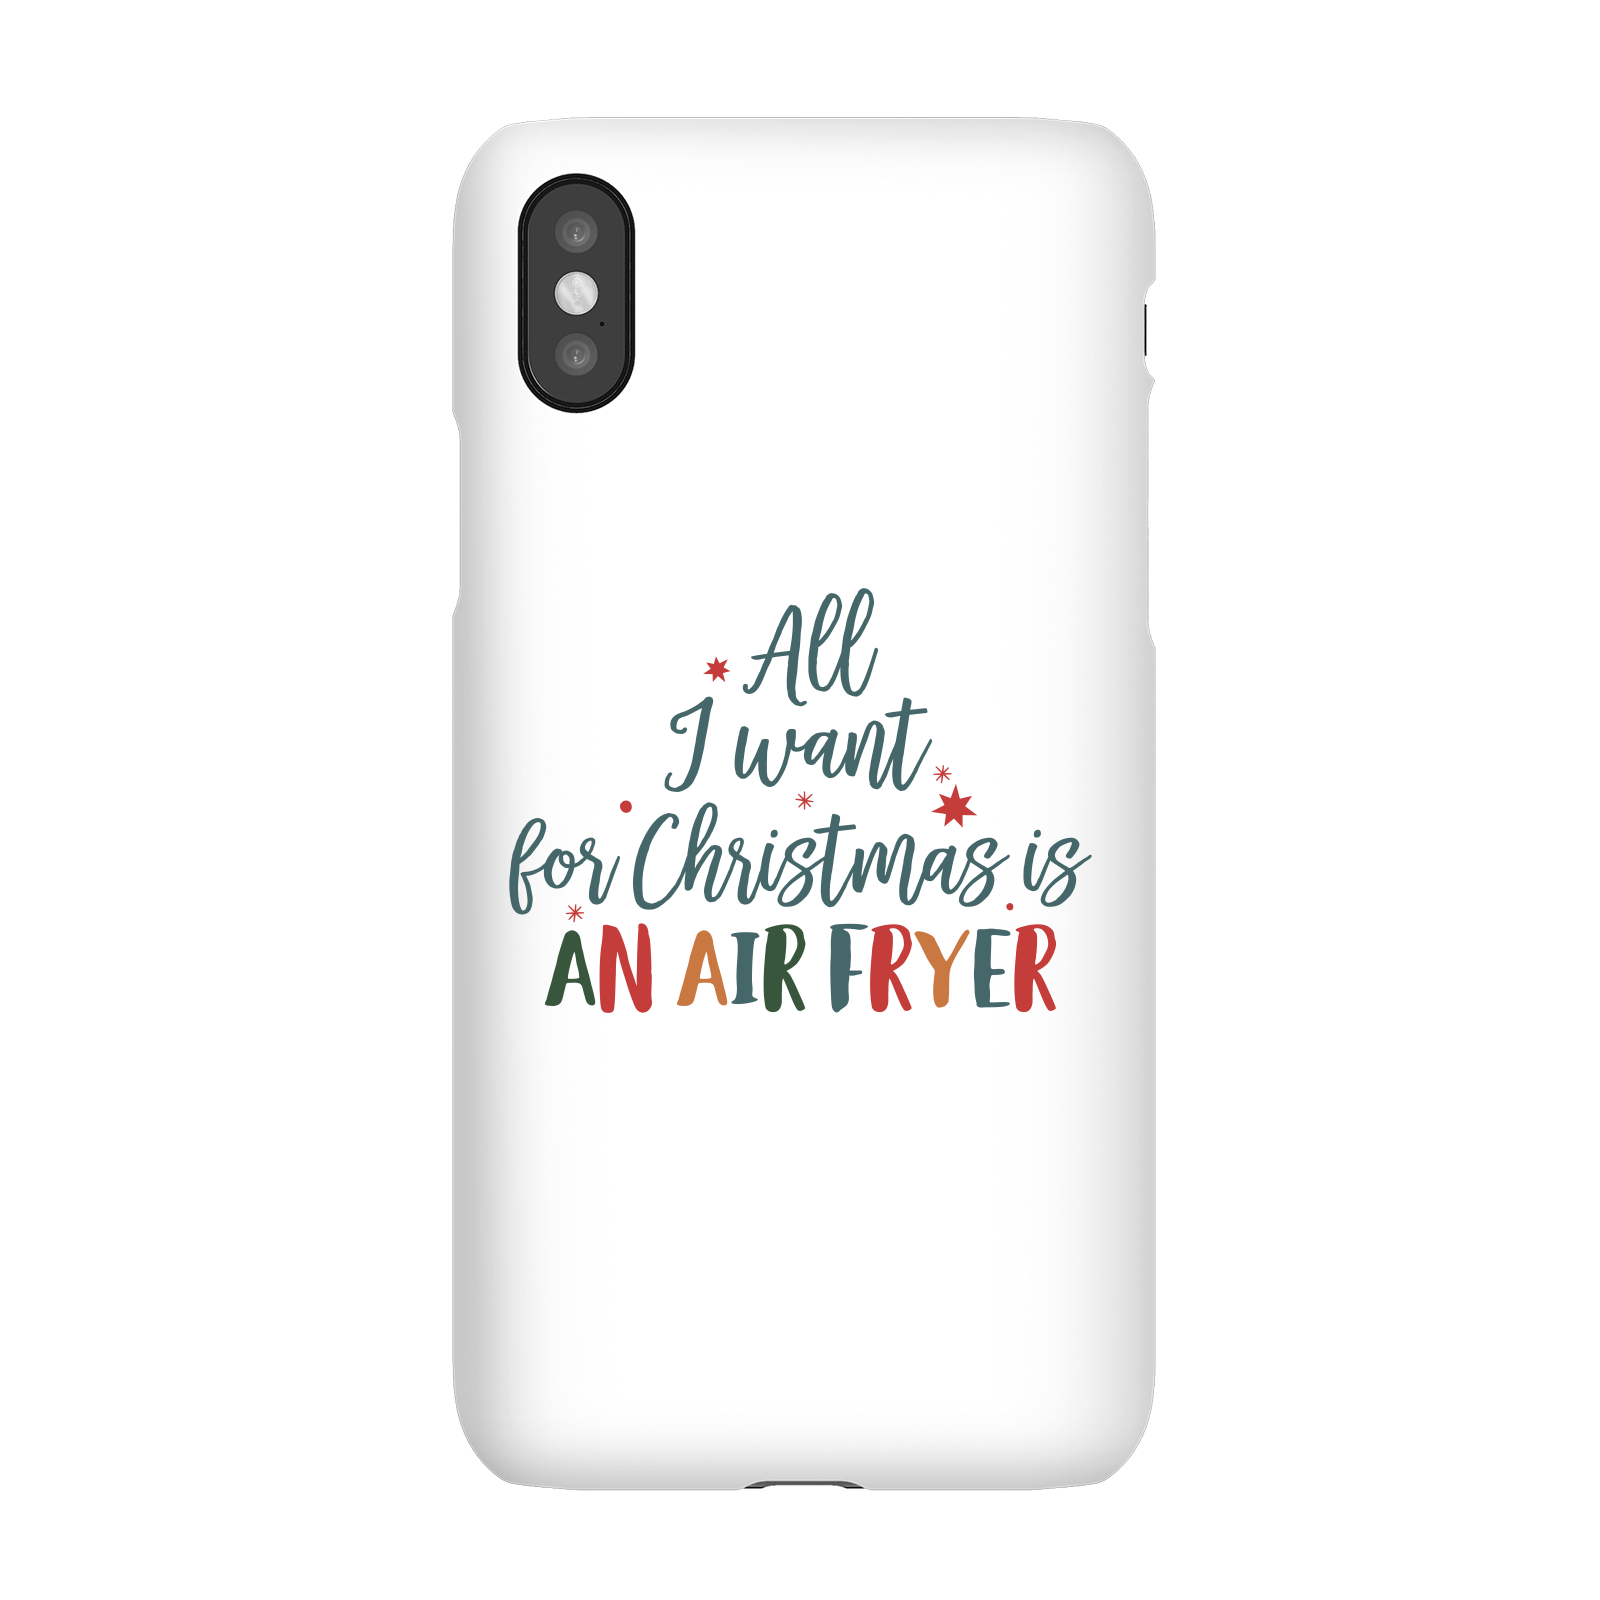 All I Want For Christmas Is An Air Fryer Phone Case for iPhone and Android - iPhone 5/5s - Snap Case - Matte